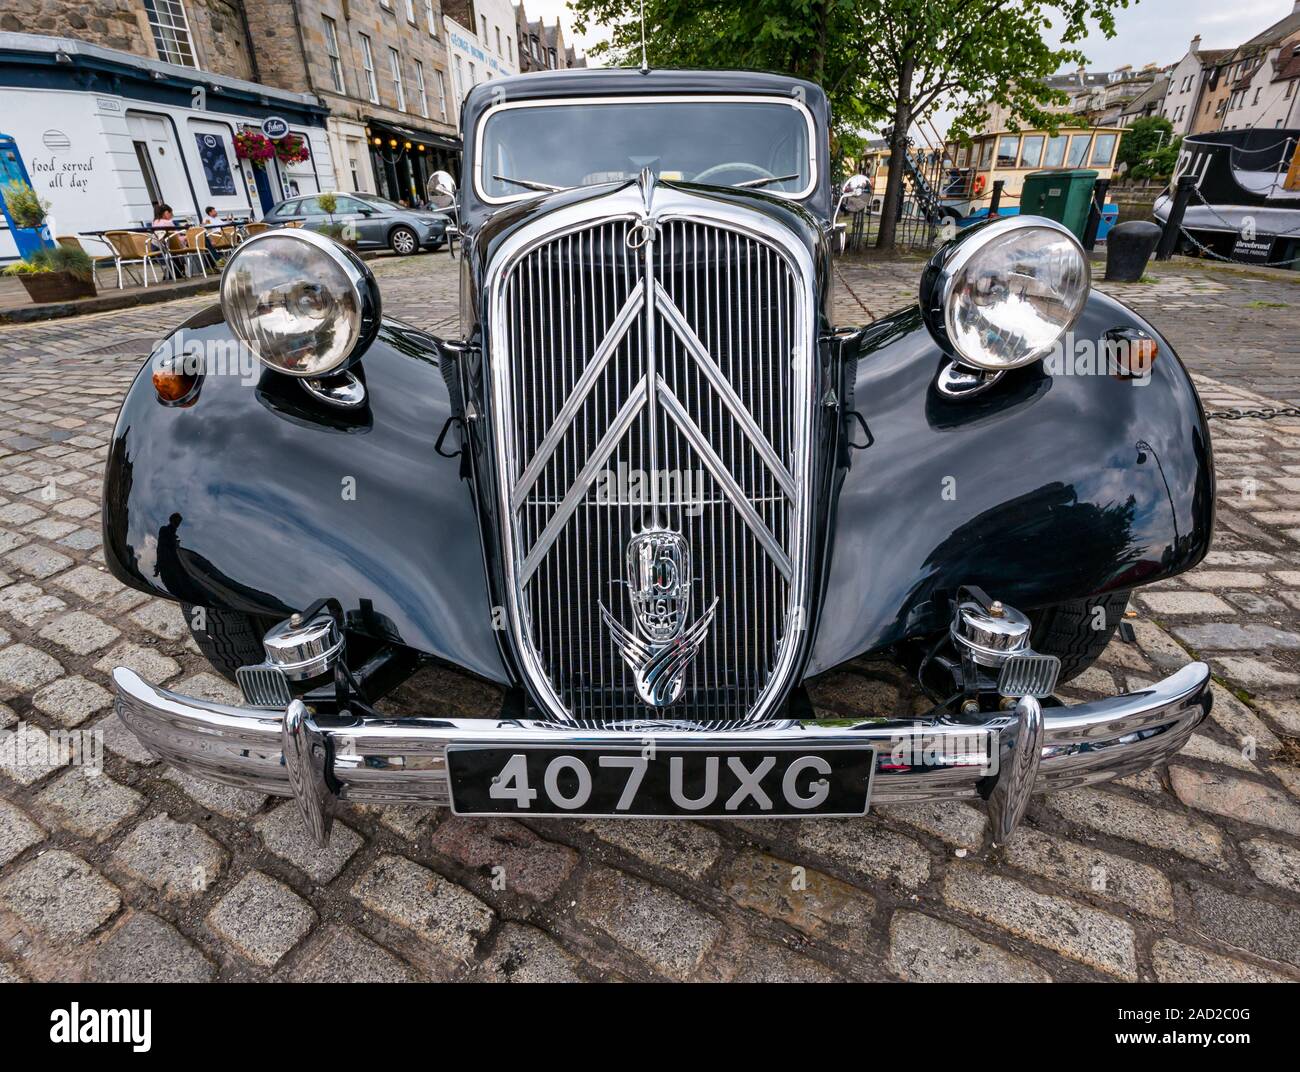 1954 vintage Citroën Traction Avant, or Big Six, parked on The Shore cobbled road, Water of Leith, Edinburgh, Scotland, UK Stock Photo